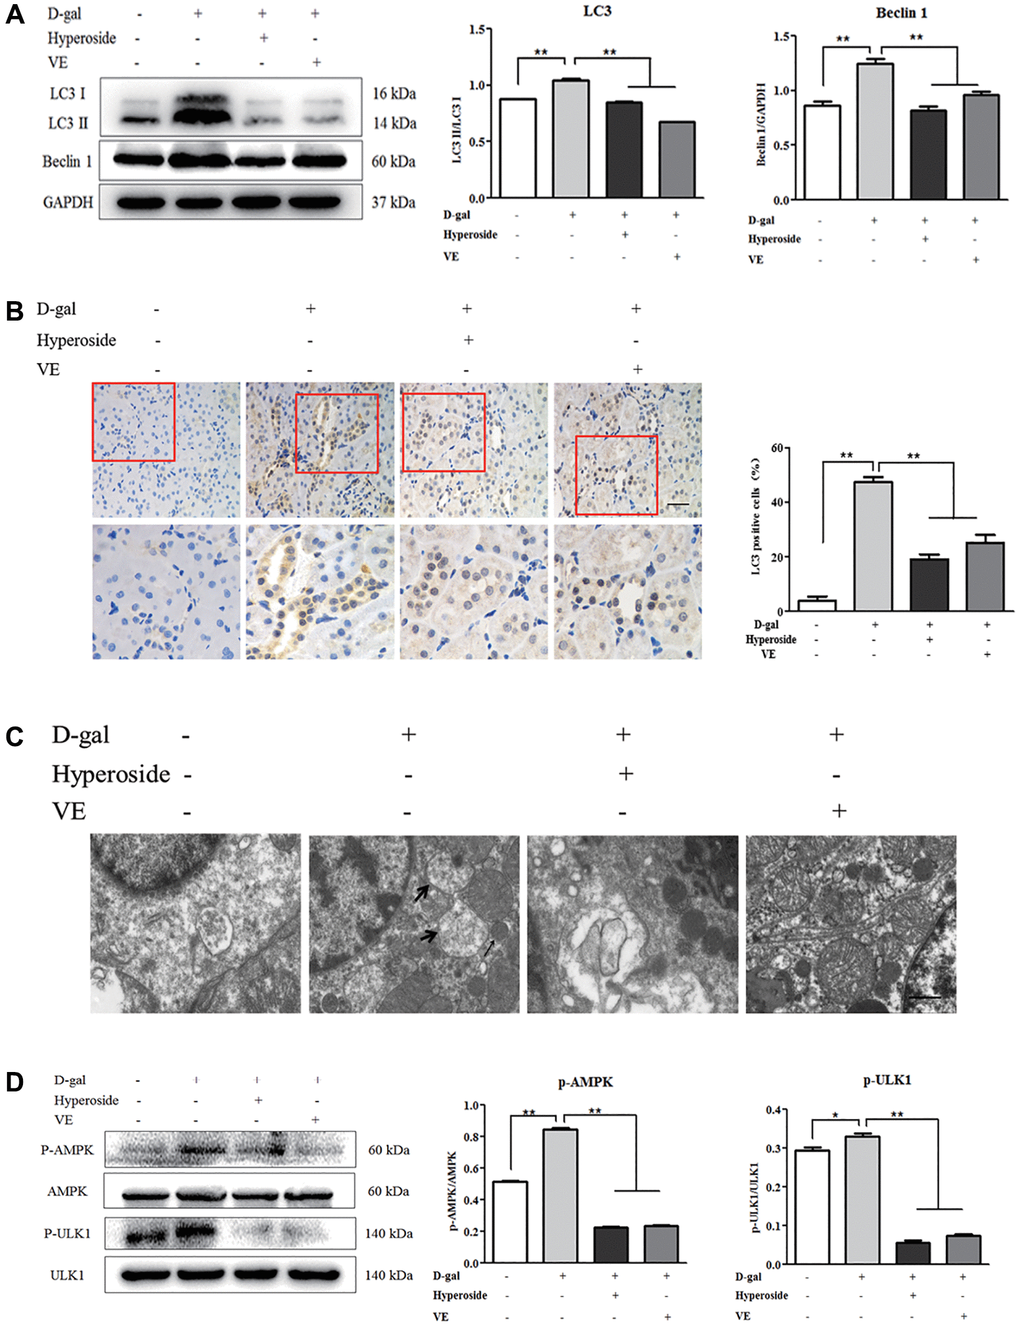 The effects of hyperoside and vitamin E on autophagic activity and the AMPK-ULK1 signaling pathway in vivo. (A) A WB analysis of LC3 I/II and Beclin1 in the kidneys from the rats in the control, the 8 week-D-gal, the D-gal + Hyperoside and the D-gal + VE groups. (B) Immunohistochemical staining of LC3 and the percentage of the positively stained areas of LC3 in the control, the 8 week-D-gal, and the D-gal + Hyperoside groups. Scale bar = 20 μm. (C) The morphological changes in the renal tubular cells of the rats in the control, the 8 weeks-D-gal, the D-gal + Hyperoside and the D-gal + VE groups by transmission electron microscopy. The black arrows show the autophagosomes with the characteristic morphology of a double membrane. (D) A WB analysis of p-AMPK, AMPK, p-ULK1 and ULK1 in the kidneys of the rats in the control, the 8 weeks-D-gal, the D-gal + Hyperoside and the D-gal + VE groups. The data are expressed as the mean ± SD, (n = 3), *P **P 